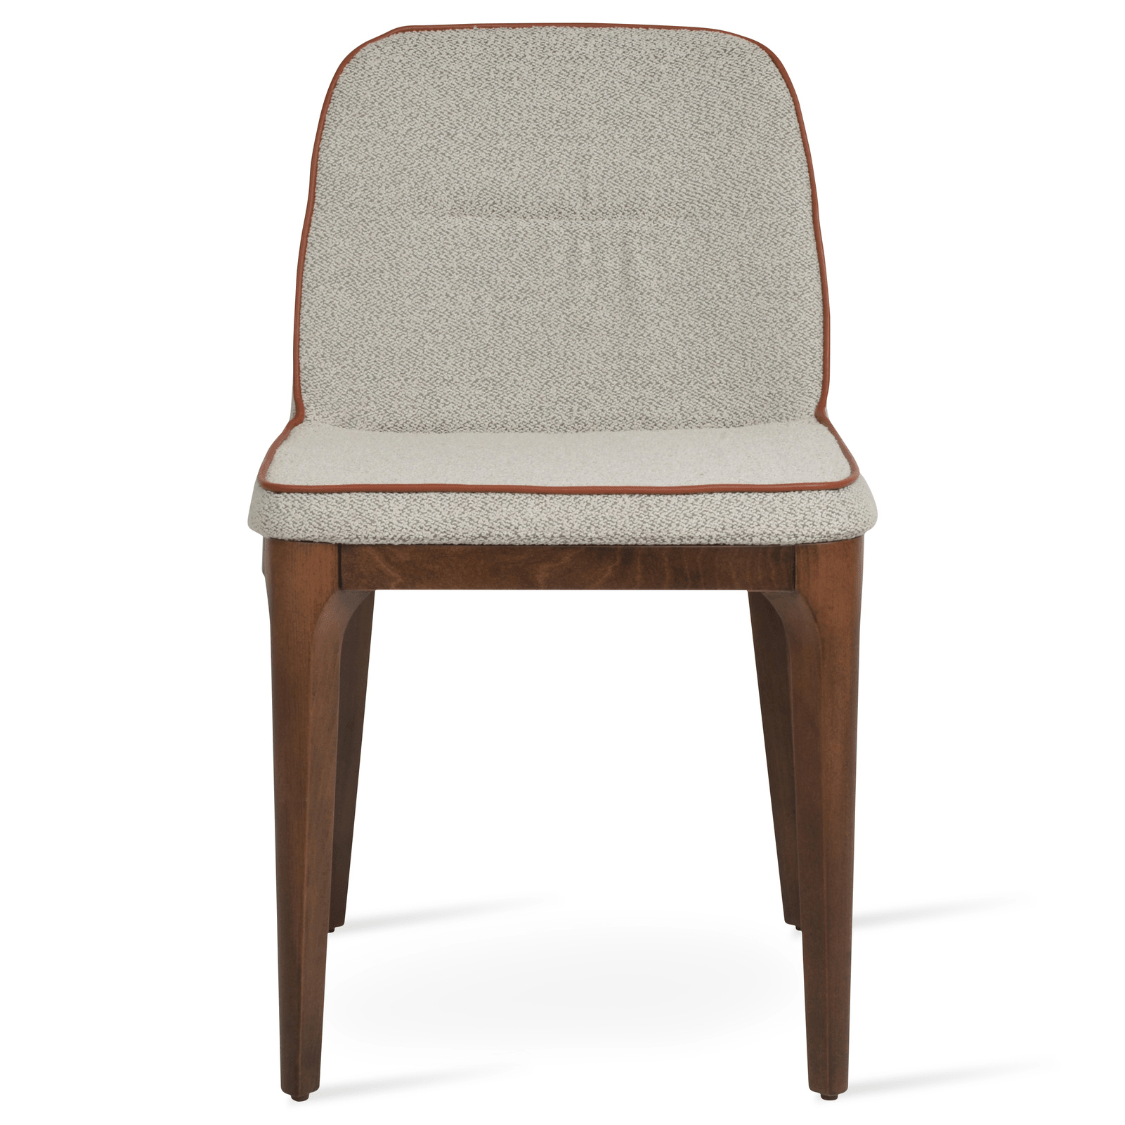 London Upholstered Side Chair - Your Bar Stools Canada